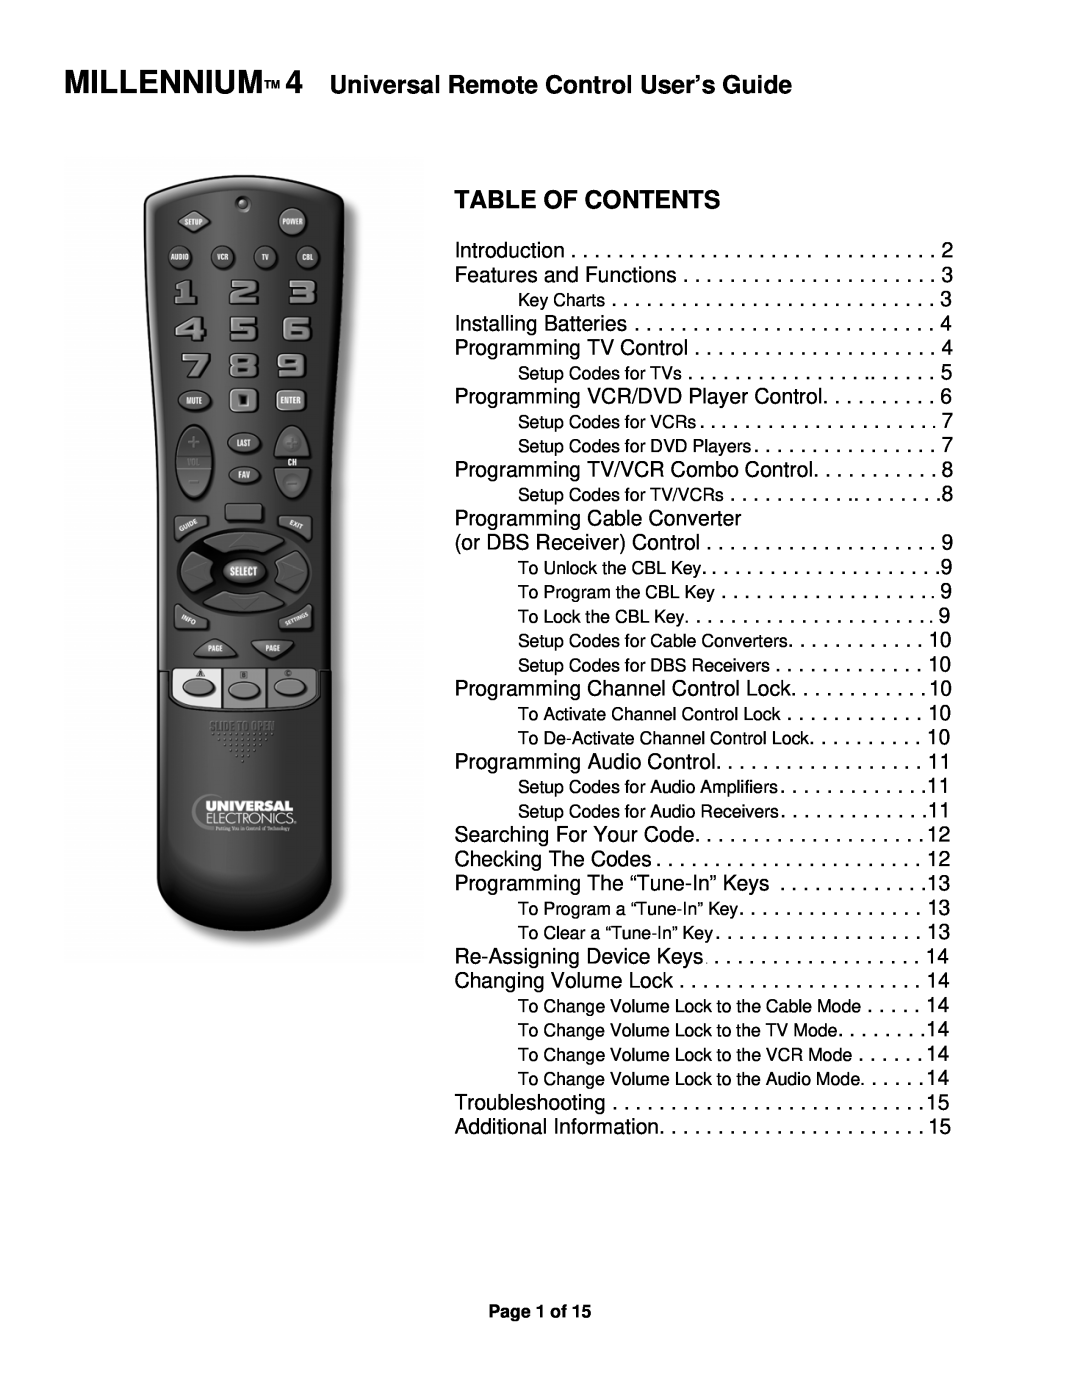 Universal Electronics Millennium 4 manual MILLENNIUM 4 Universal Remote Control User’s Guide TABLE OF CONTENTS 